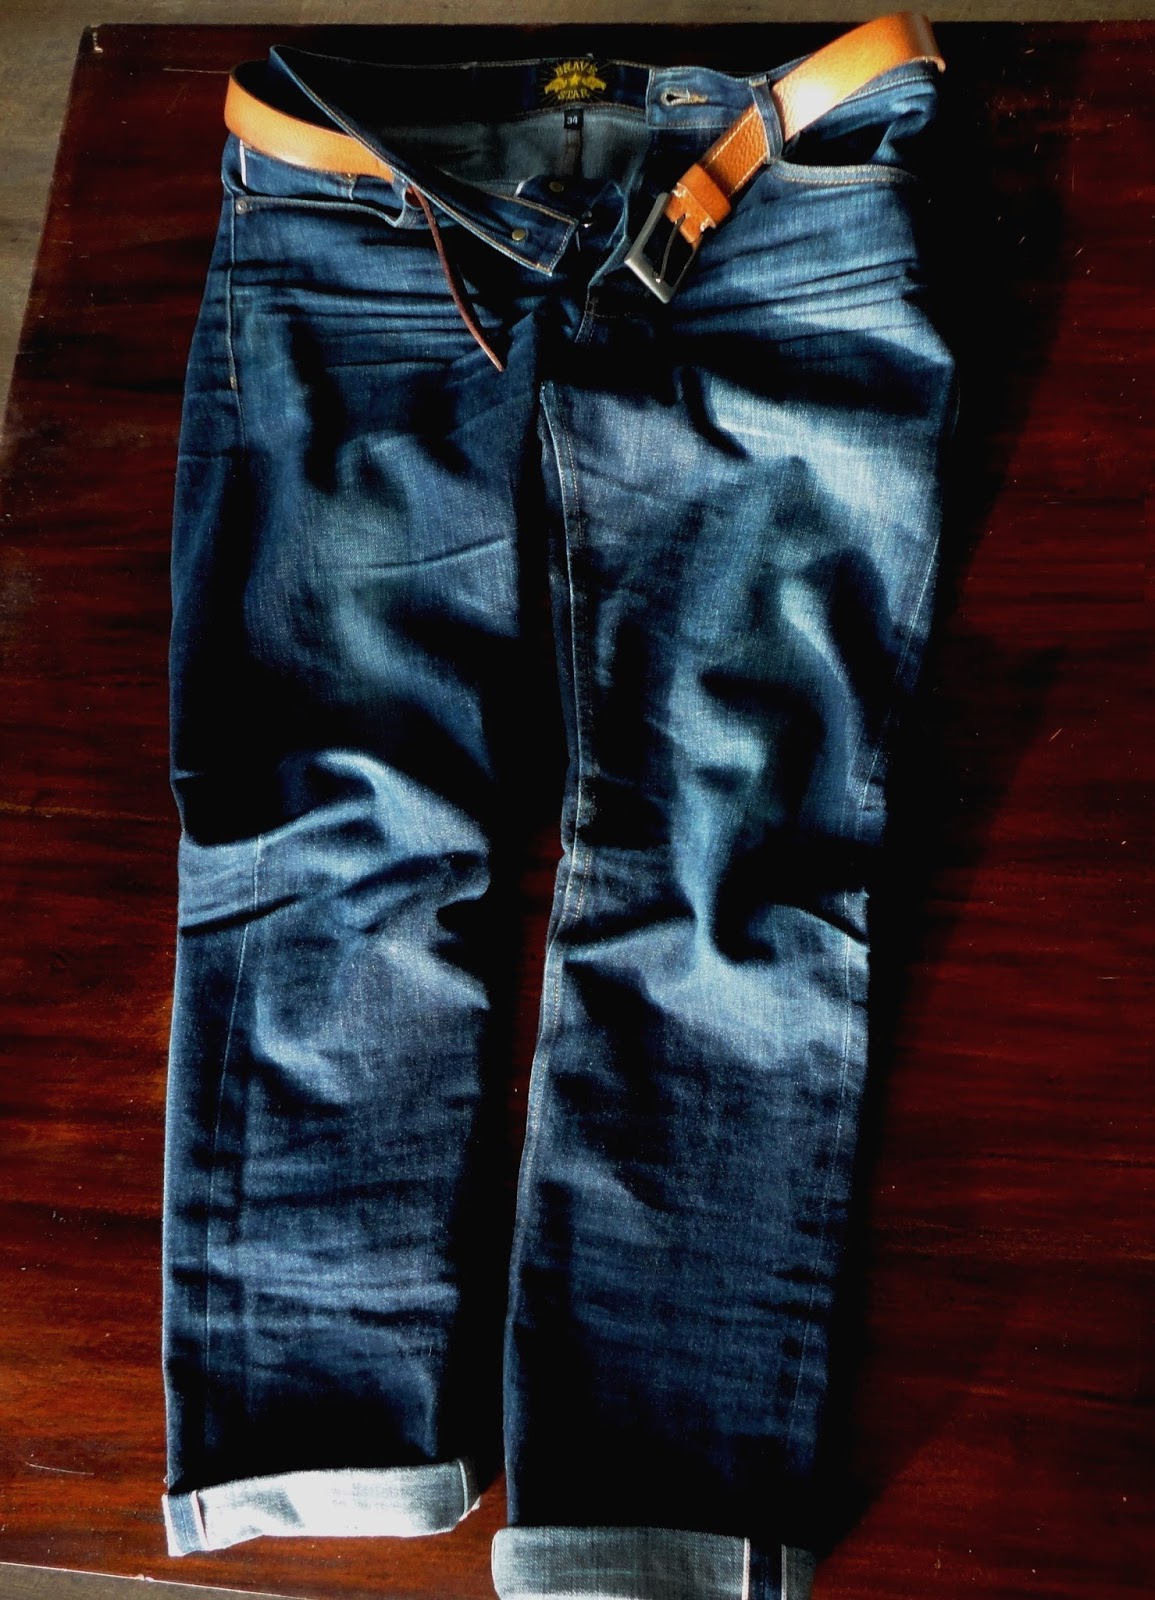 Selvage Denim - Built by you. Hand crafted by us. by BRAVE STAR SELVAGE —  Kickstarter